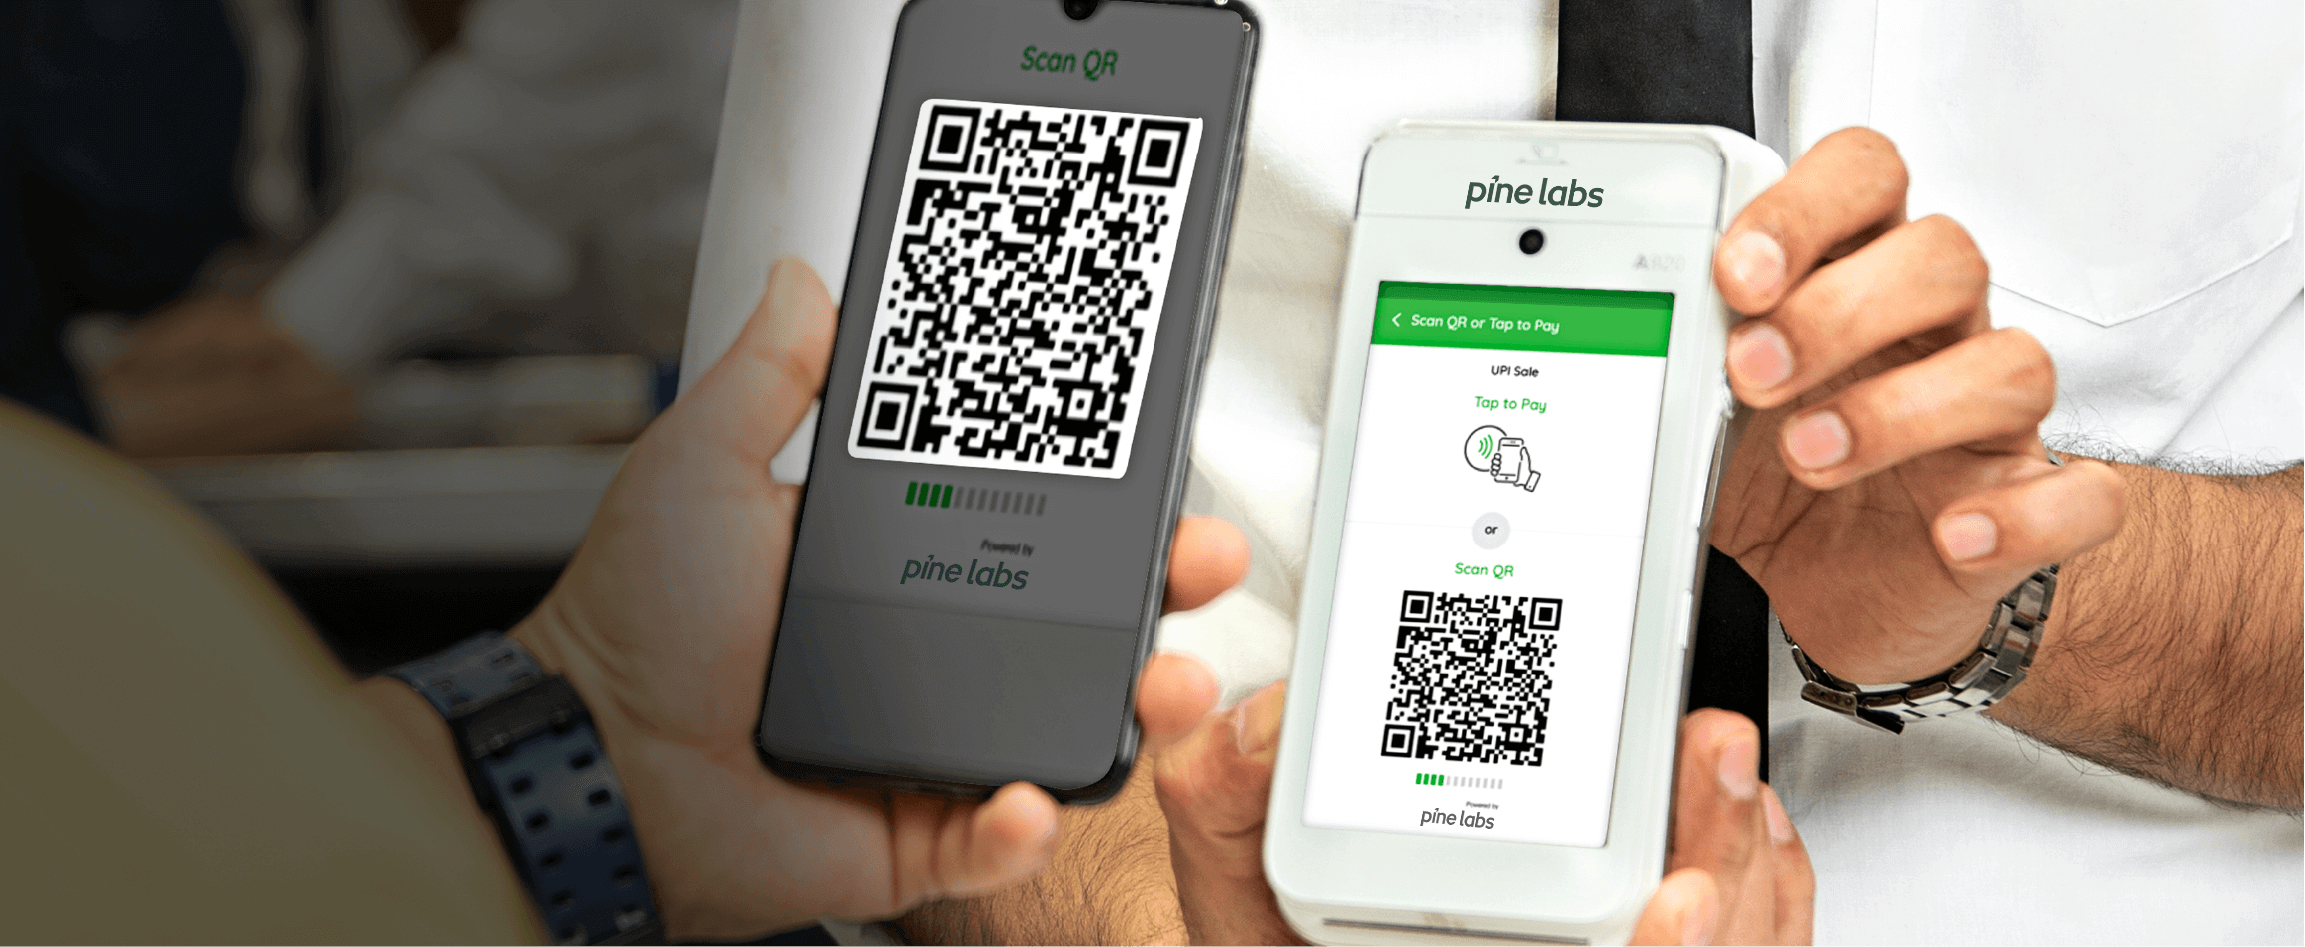 scan qr codes and pay 